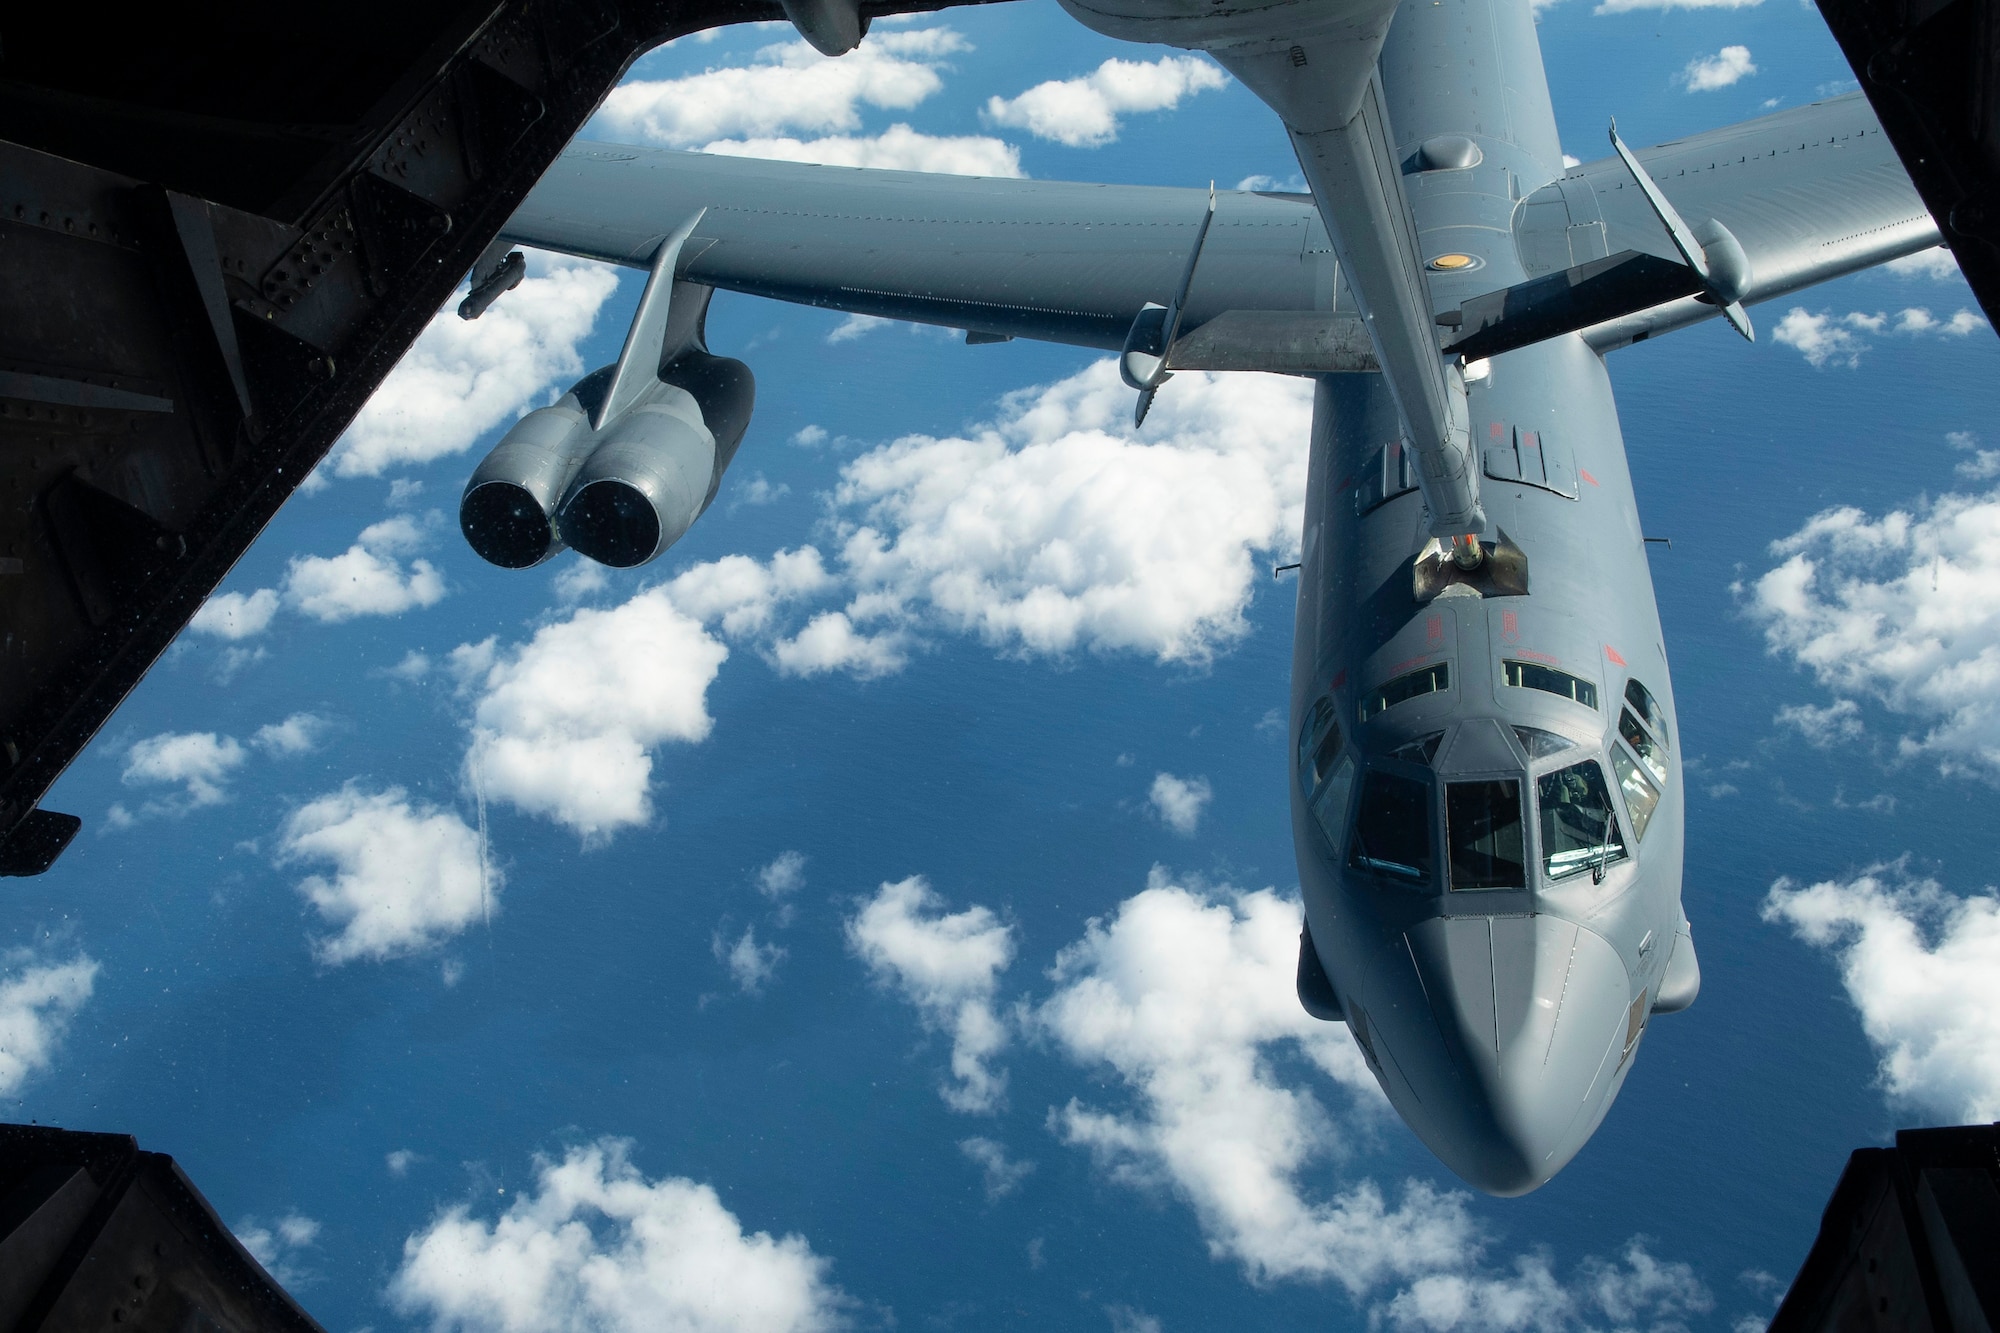 A U.S. Air Force B-52 Stratofortress is refueled by a USAF KC-10 Extender July 14, over the Pacific Ocean near the coast of Brisbane, Australia, in support of Exercise Talisman Sabre 19. The Stratofortress and Extender were some of several aircraft used during TS19,  alongside other USAF and RAAF airborne warning and control system aircraft, refuelers, tankers and bombers.(U.S. Air Force photo by Senior Airman Elora J. Martinez)